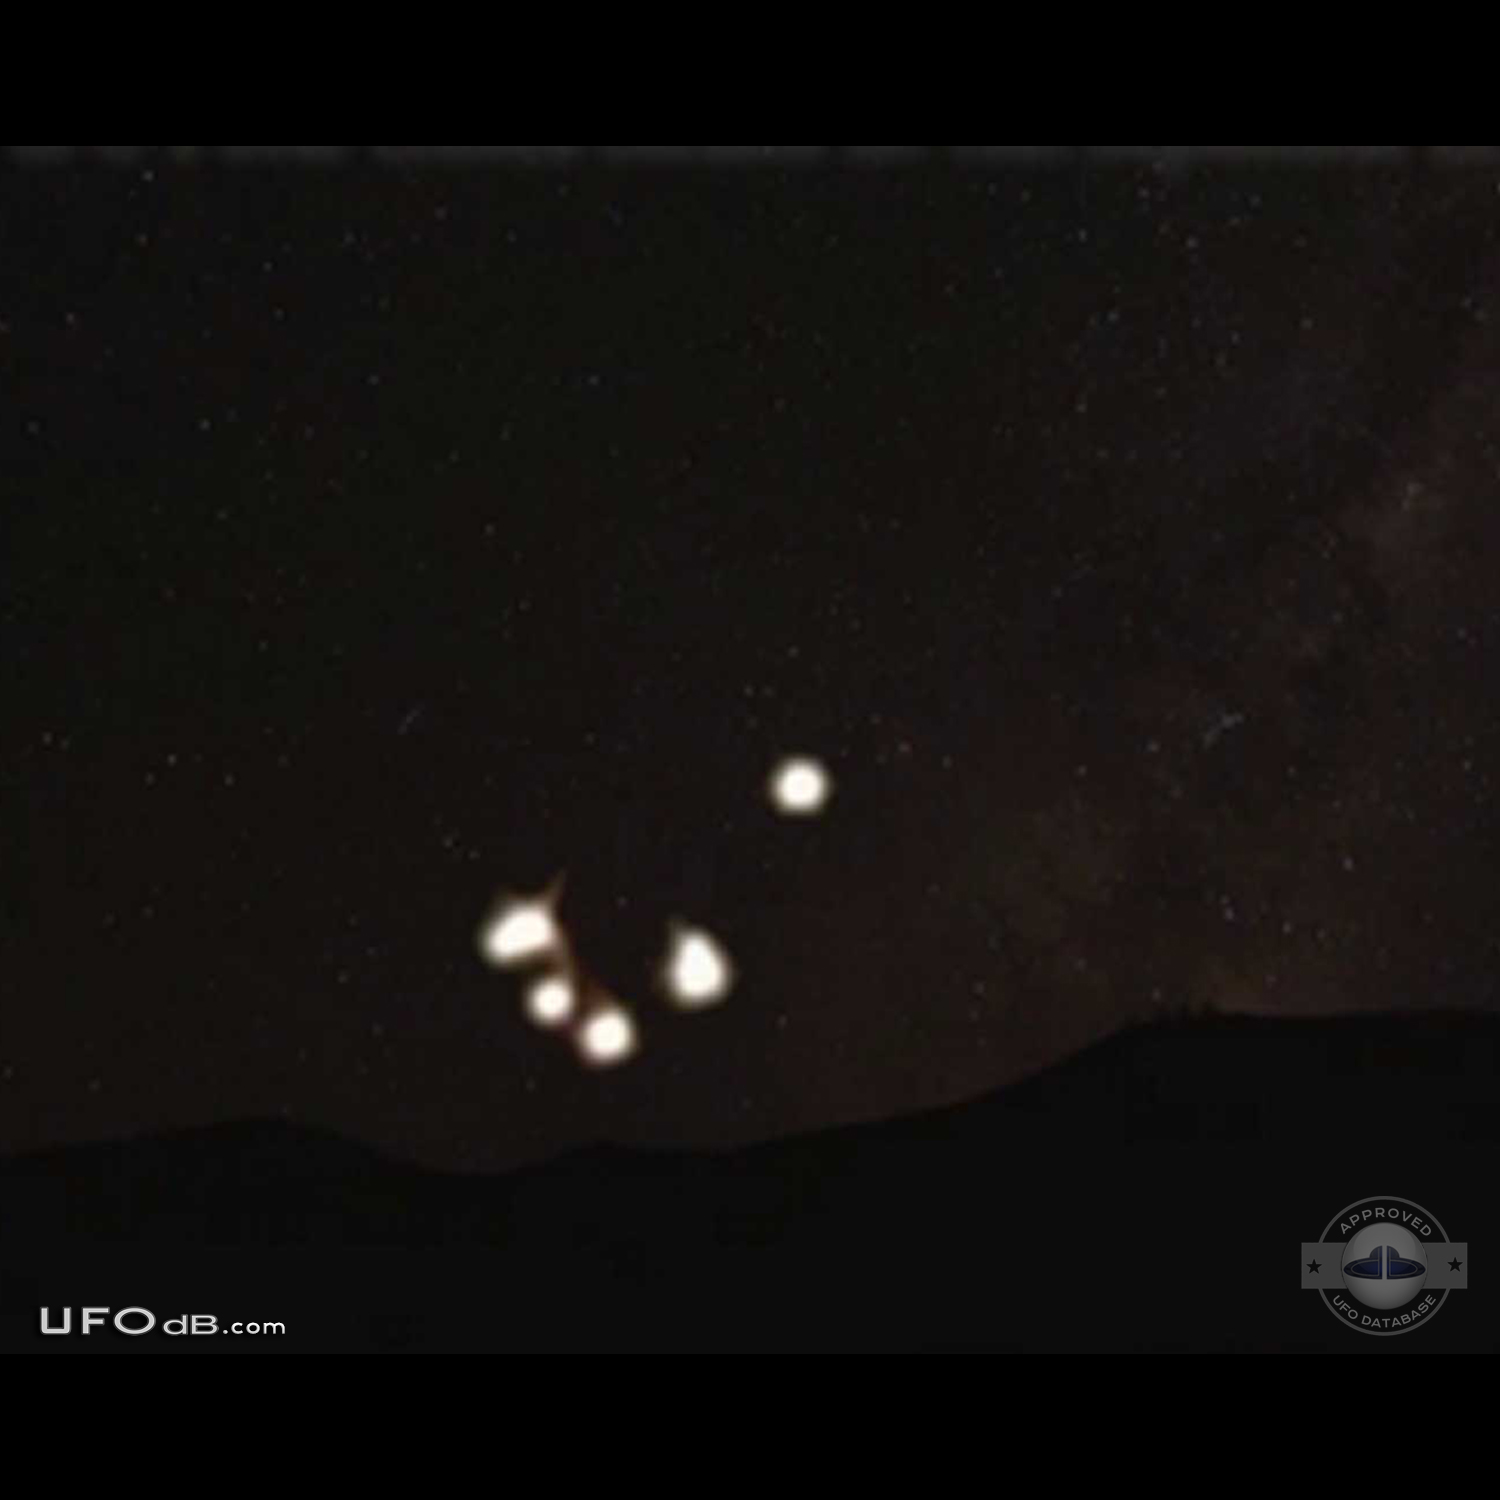 Formation of UFOs of different sizes in the night over Crimea, Ukraine UFO Picture #385-2